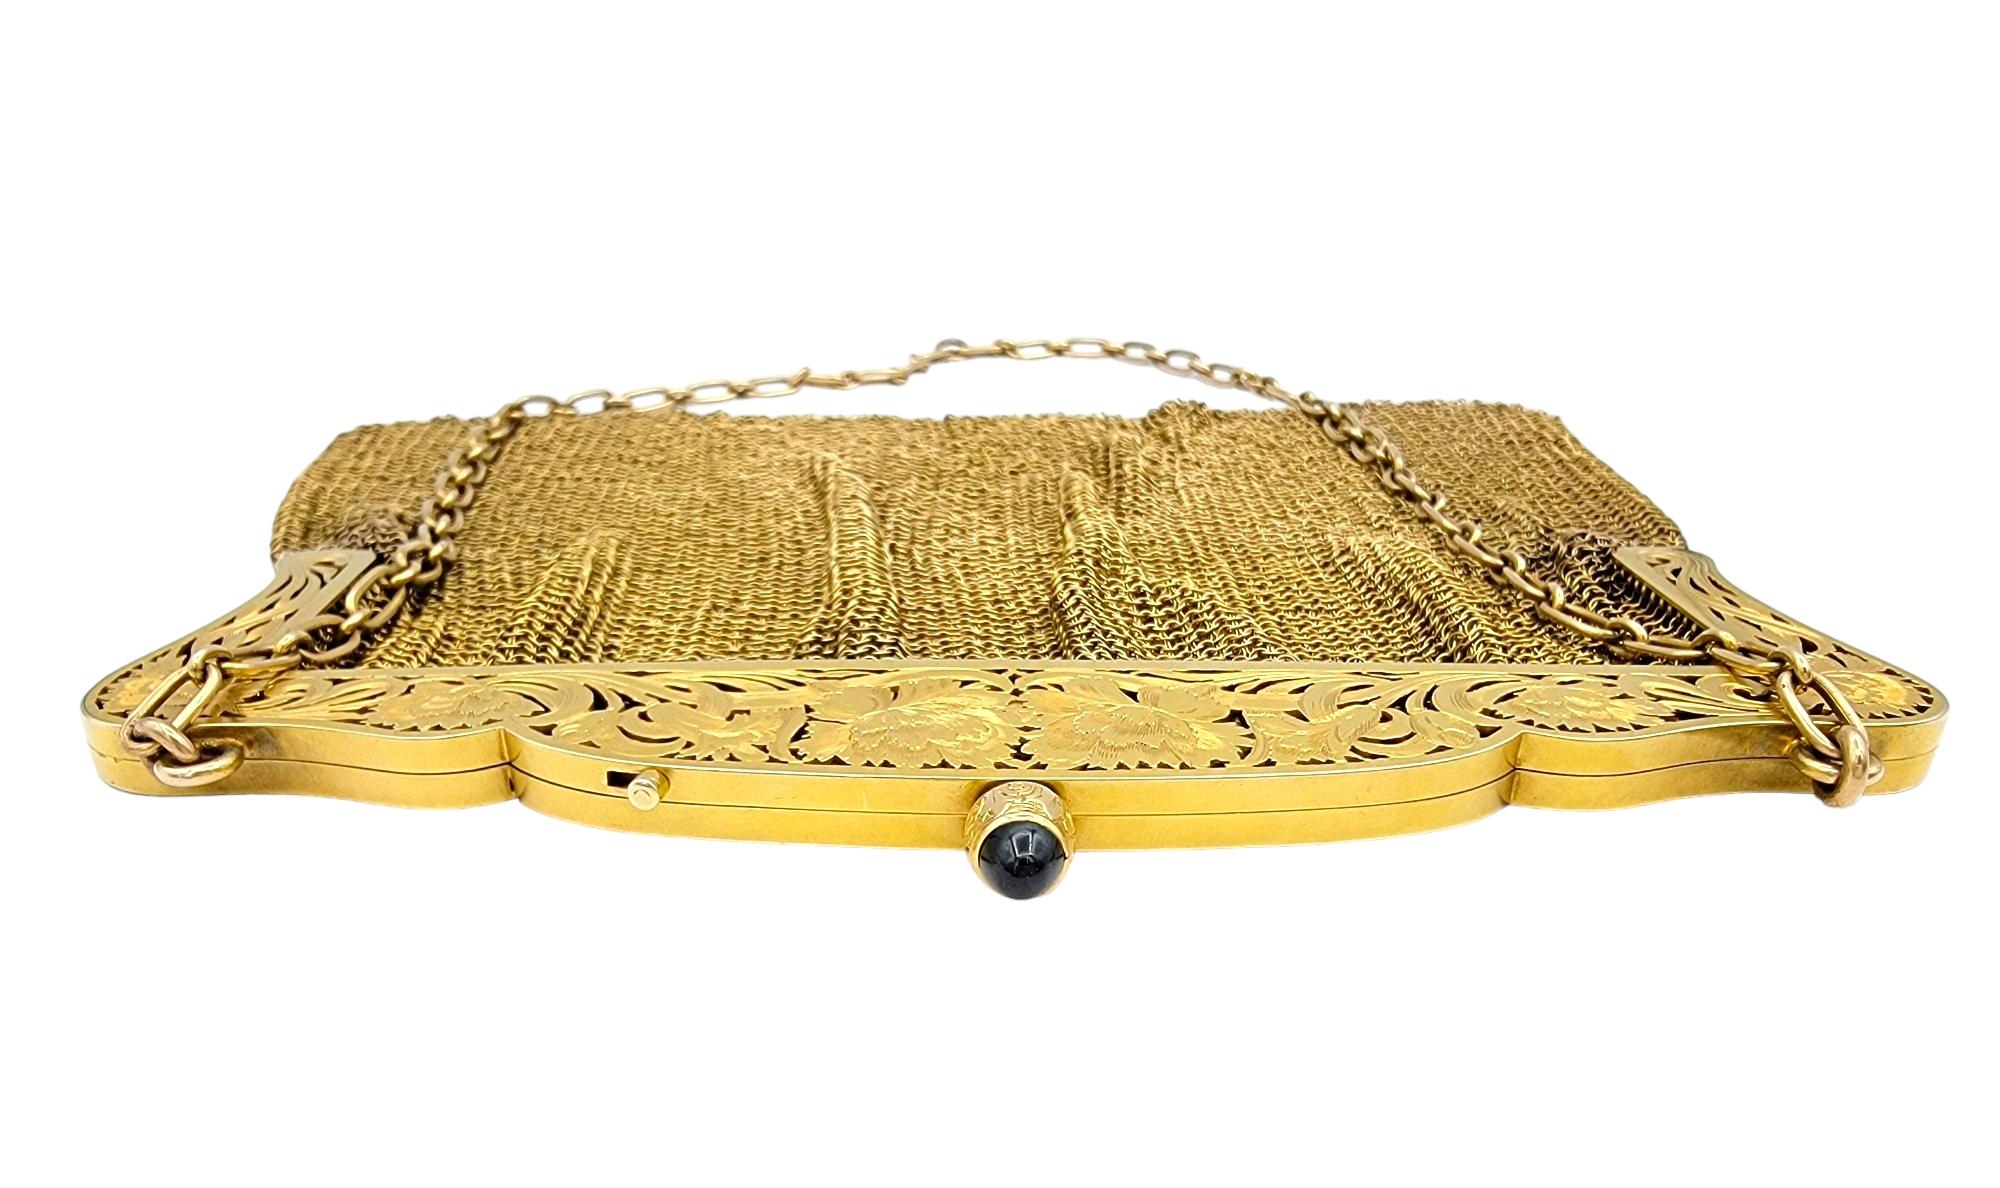 Vintage Art Deco 14 Karat Gold Mesh Purse with Chain and Sapphire Cabochon Clasp For Sale 4